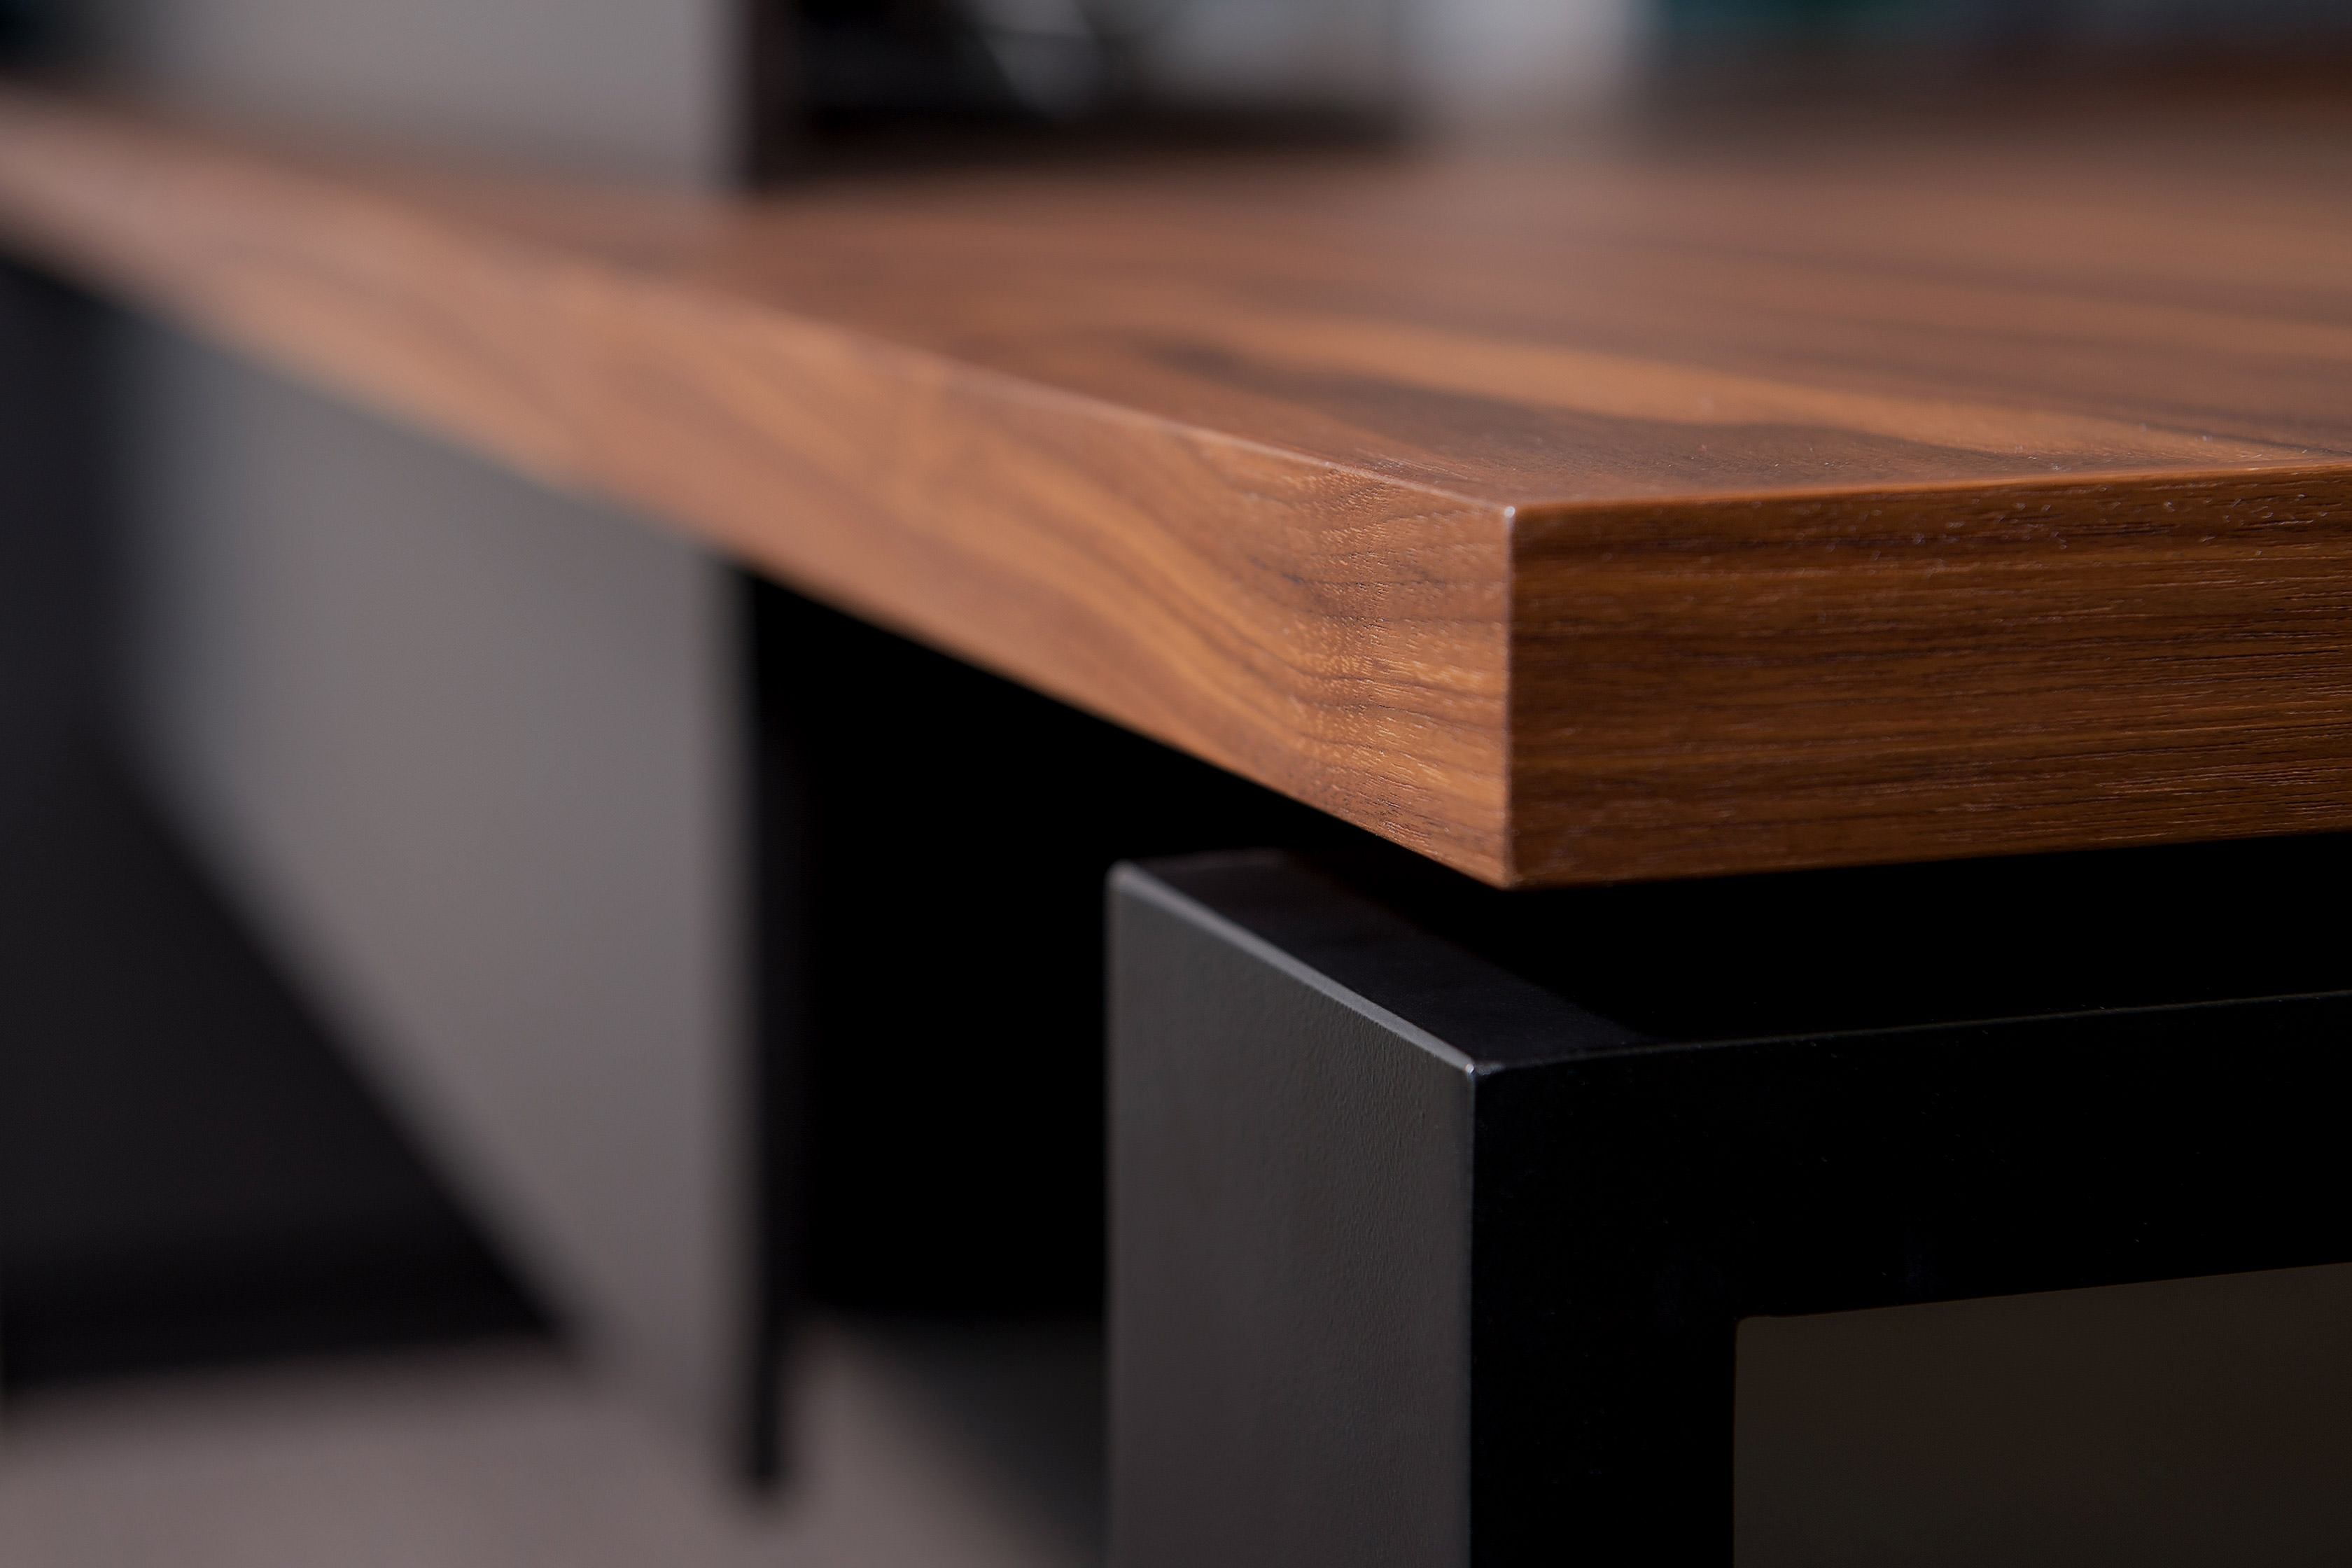 A superb corner detail of the solid walnut desk by Australian designer FrancoCrea catches your eye as you move through the office